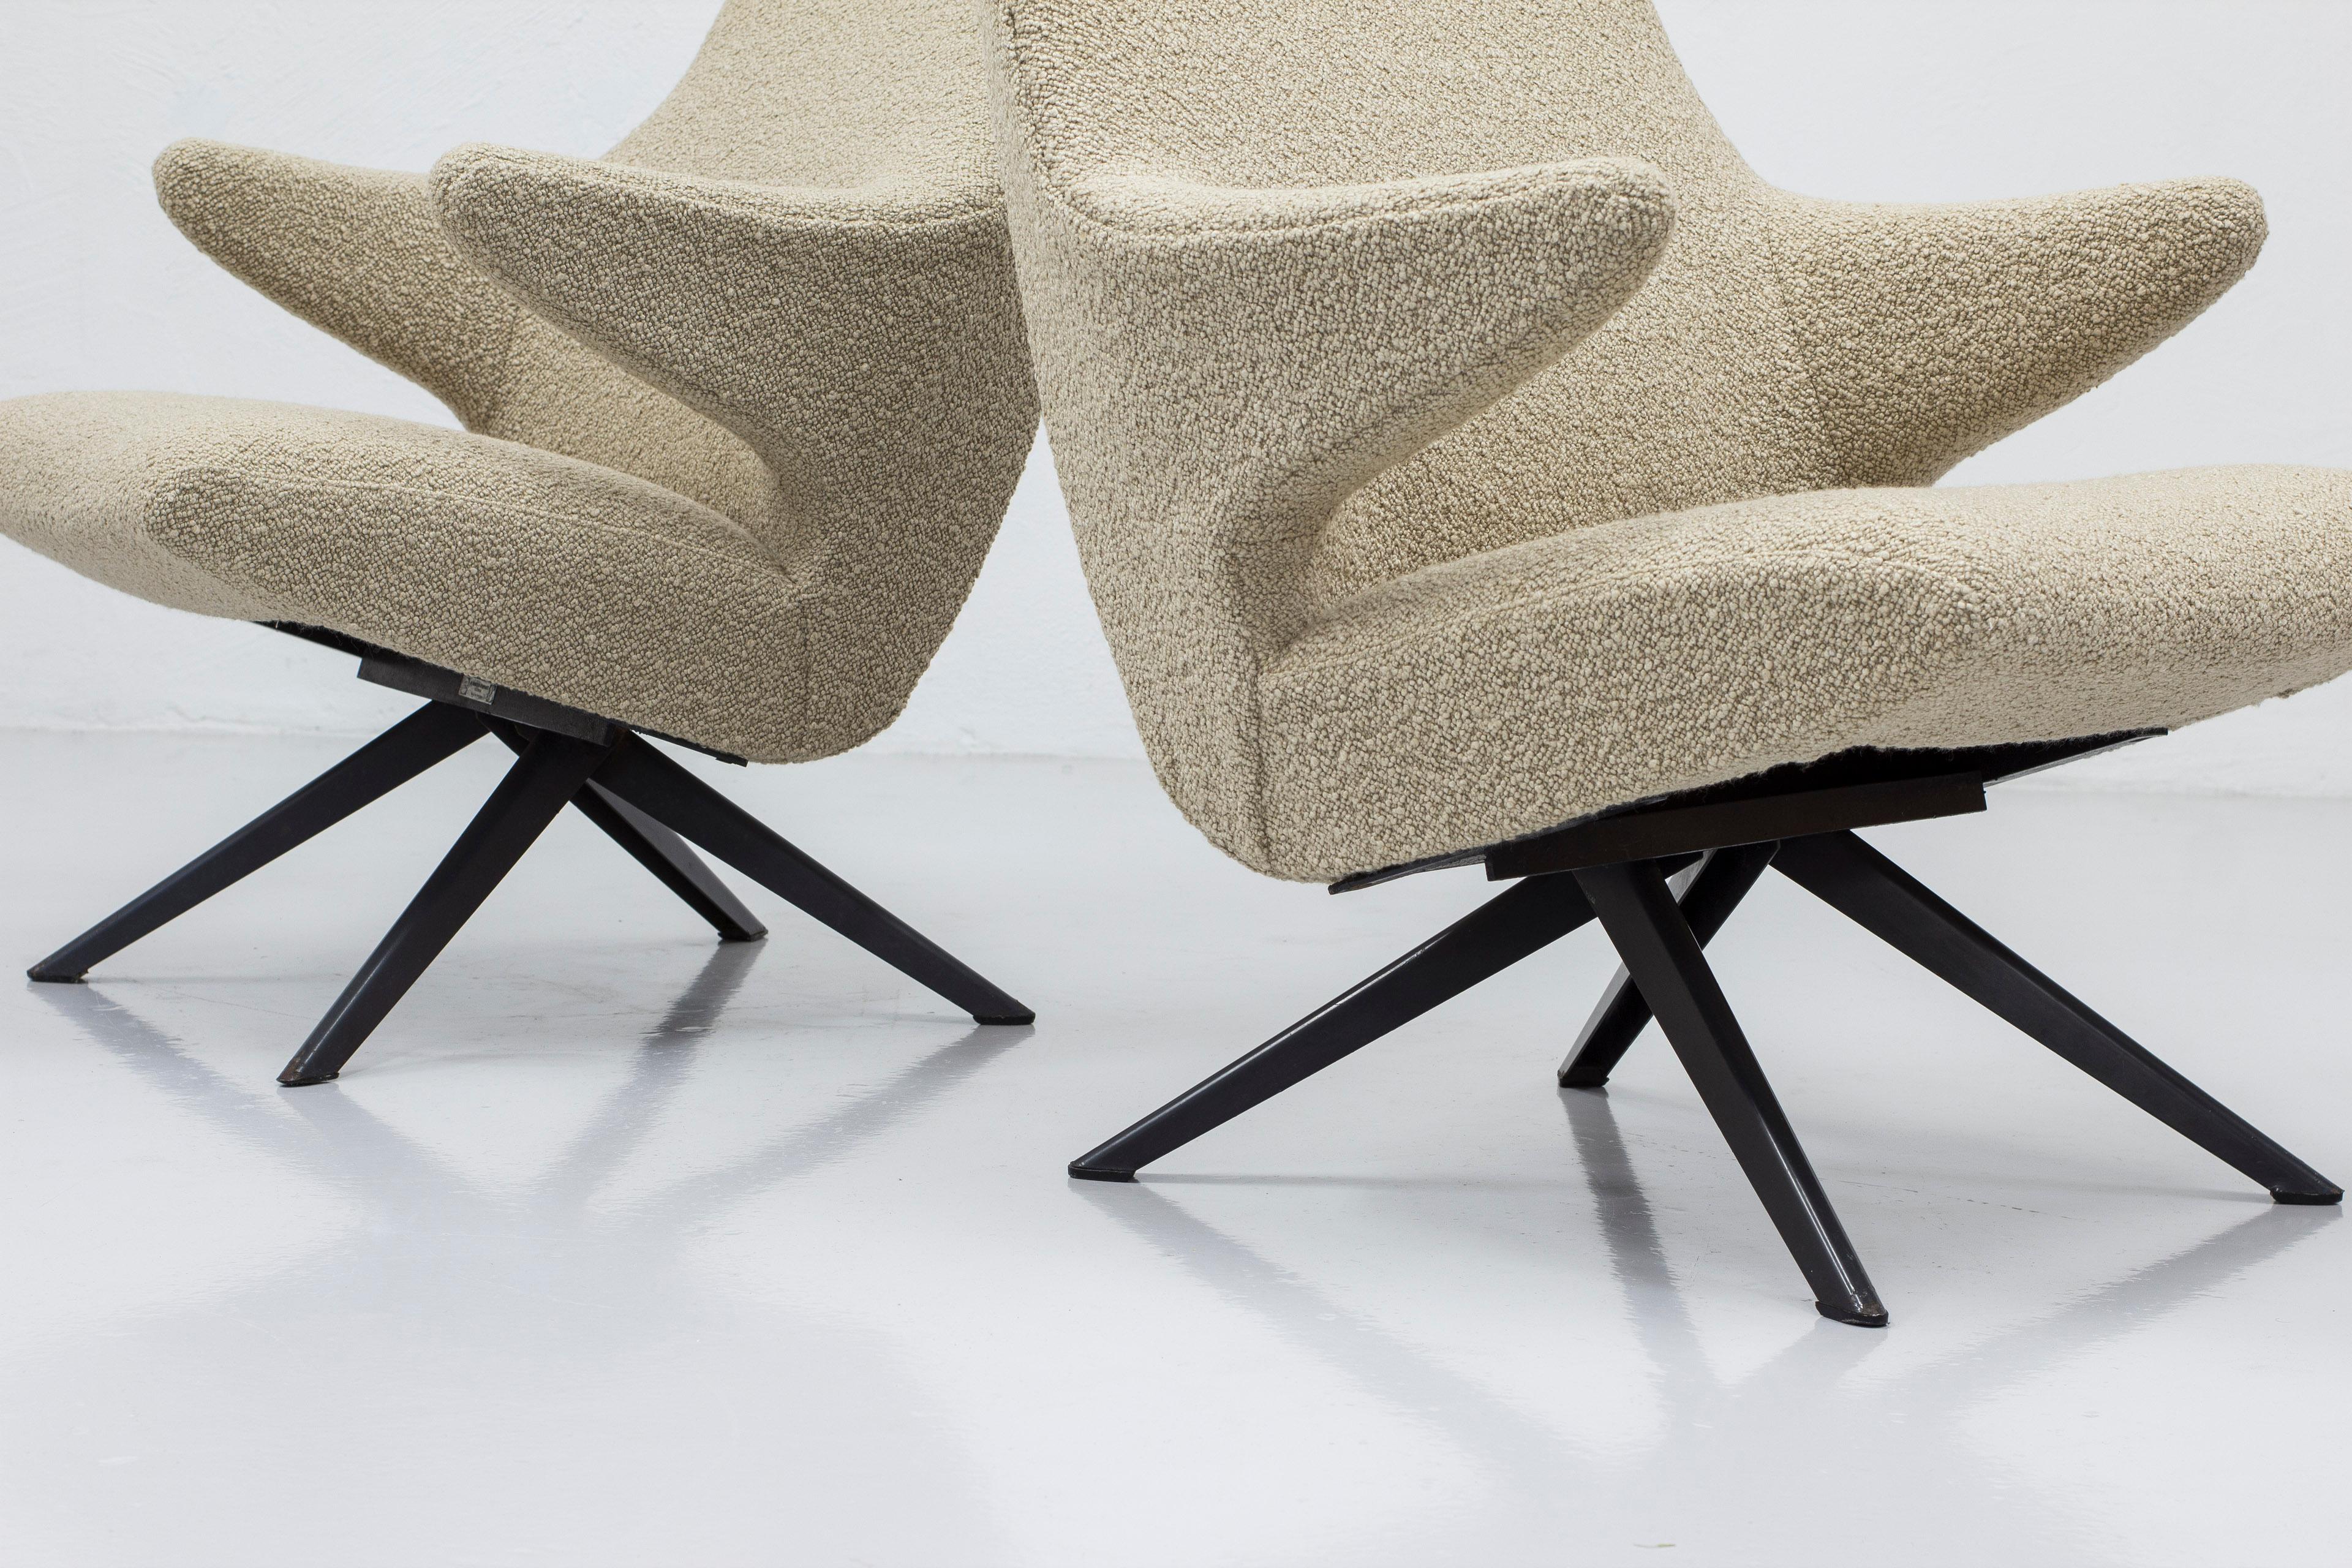 Pair of lounge chairs designed by Bengt Ruda by Nordiska Kompaniet, 1950 For Sale 3